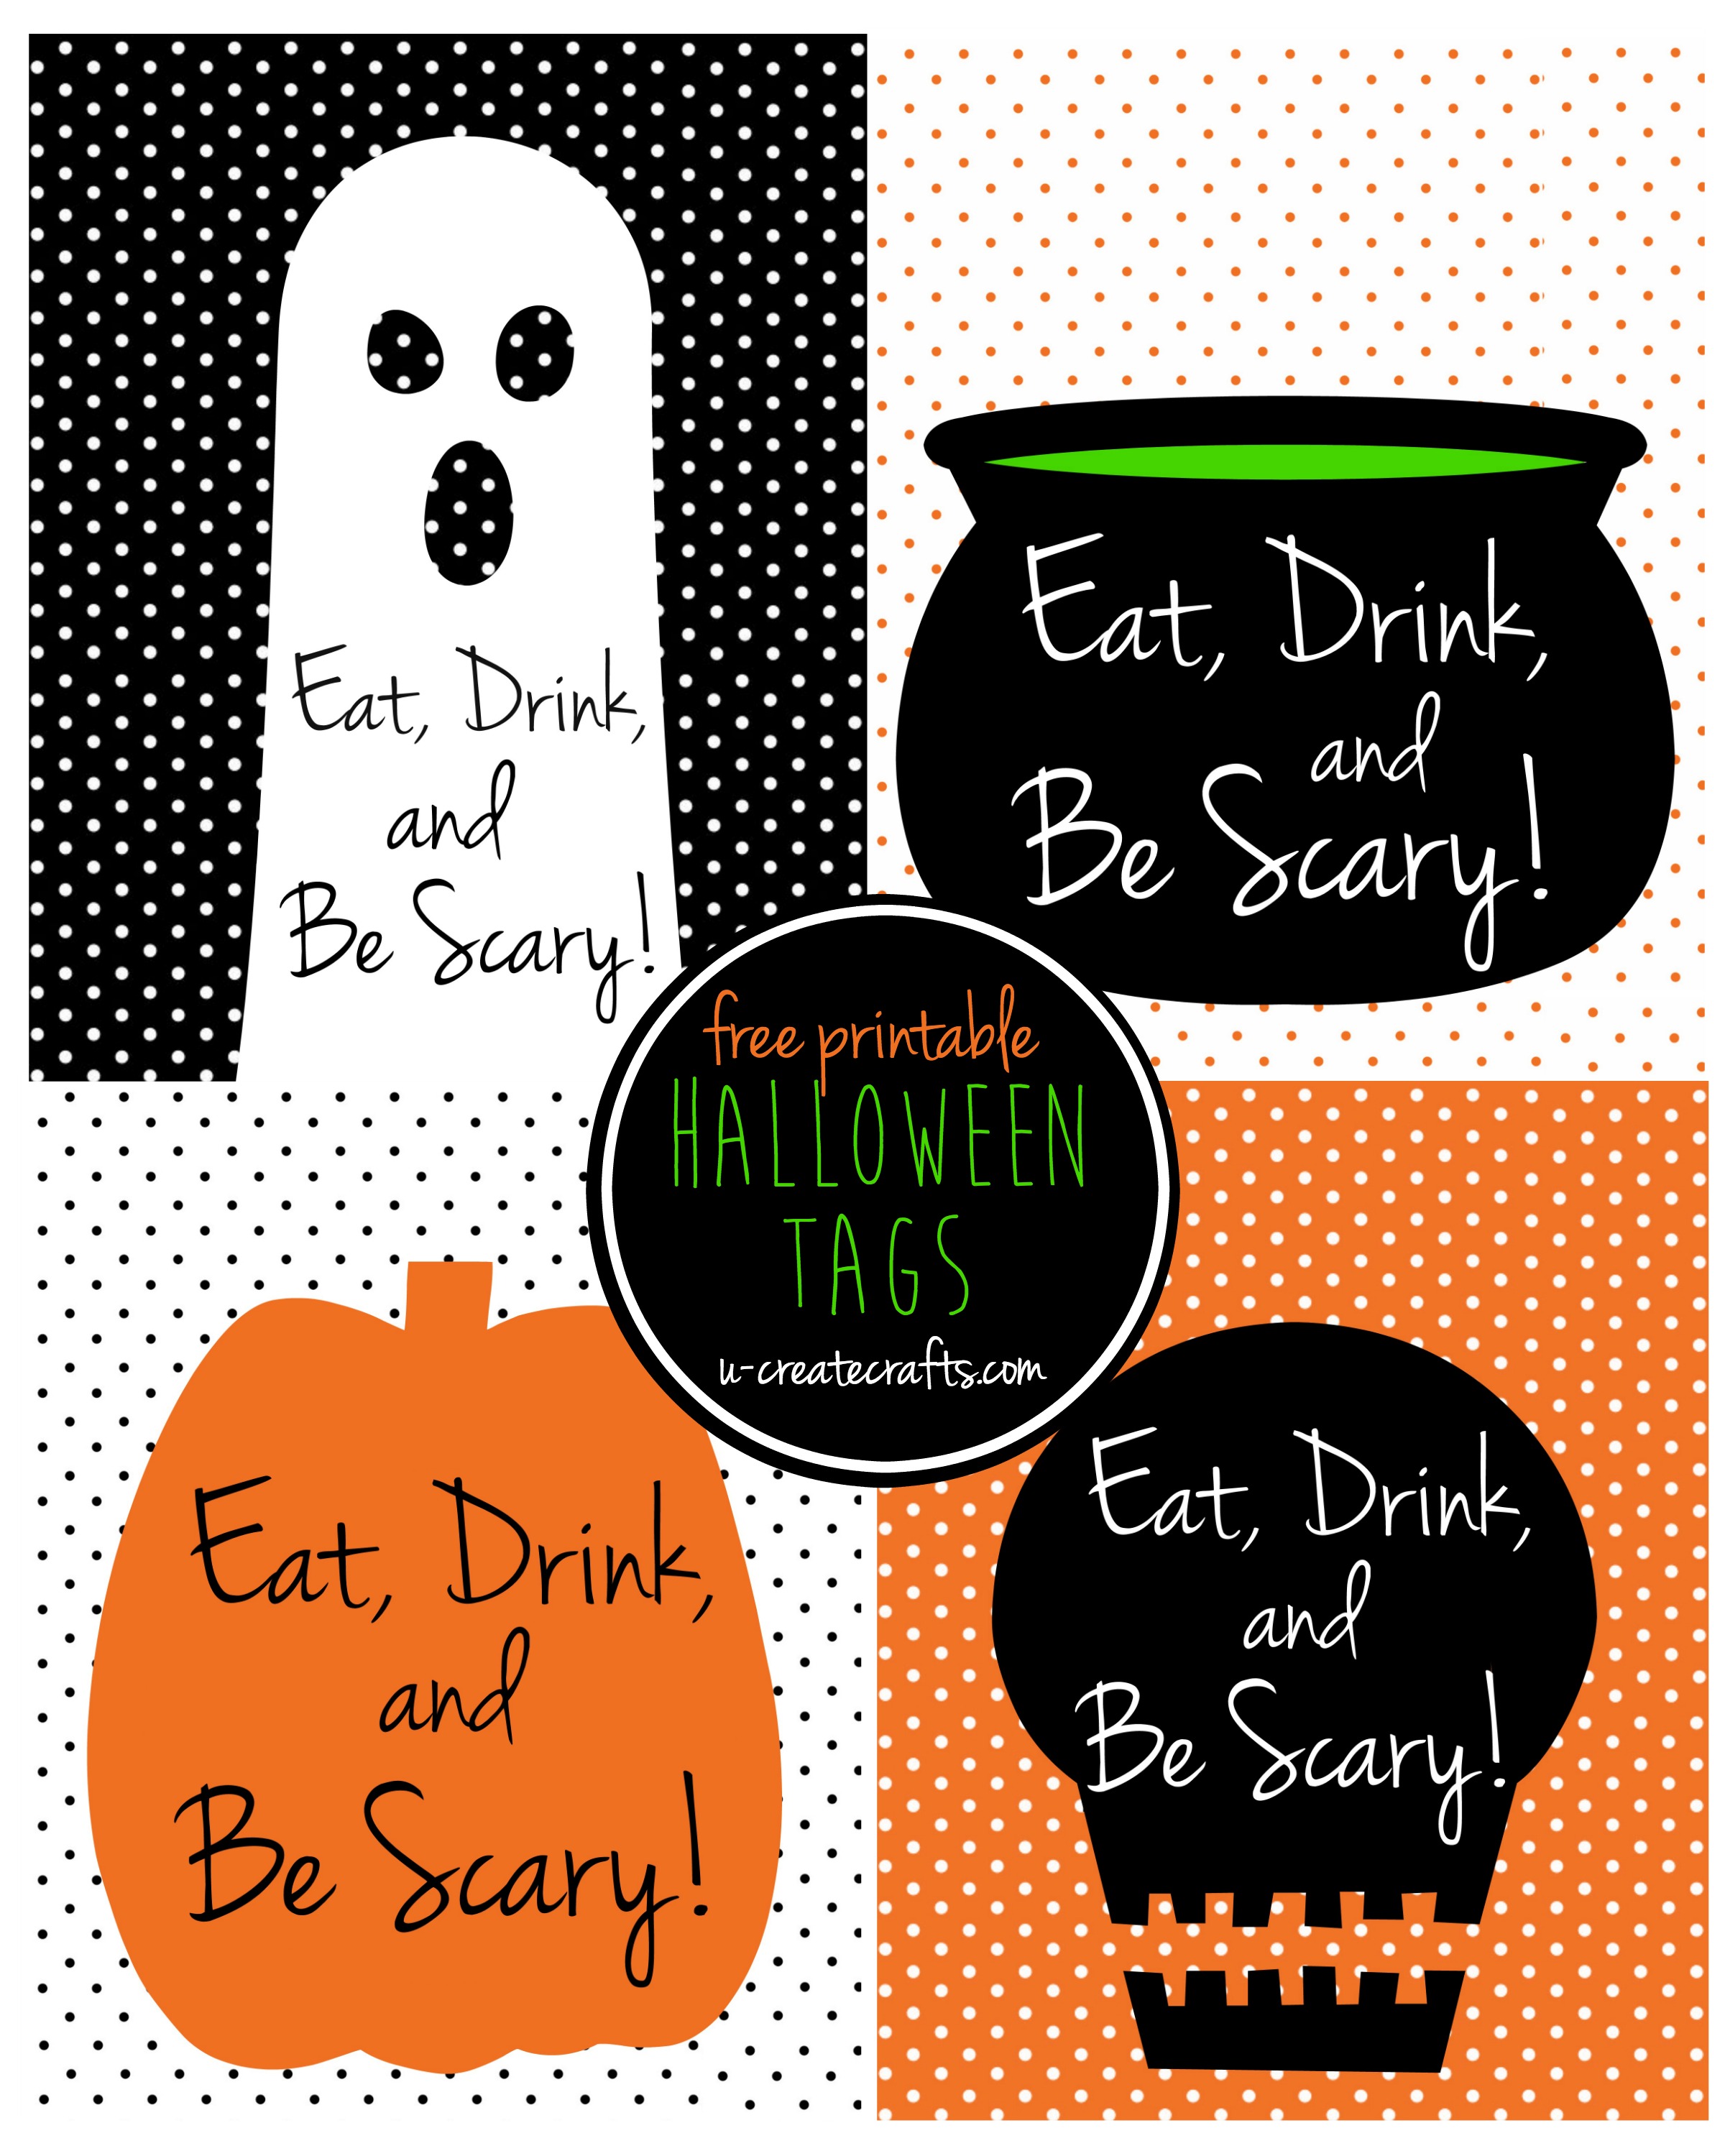 Eat Drink And Be Scary Halloween Printable Tags